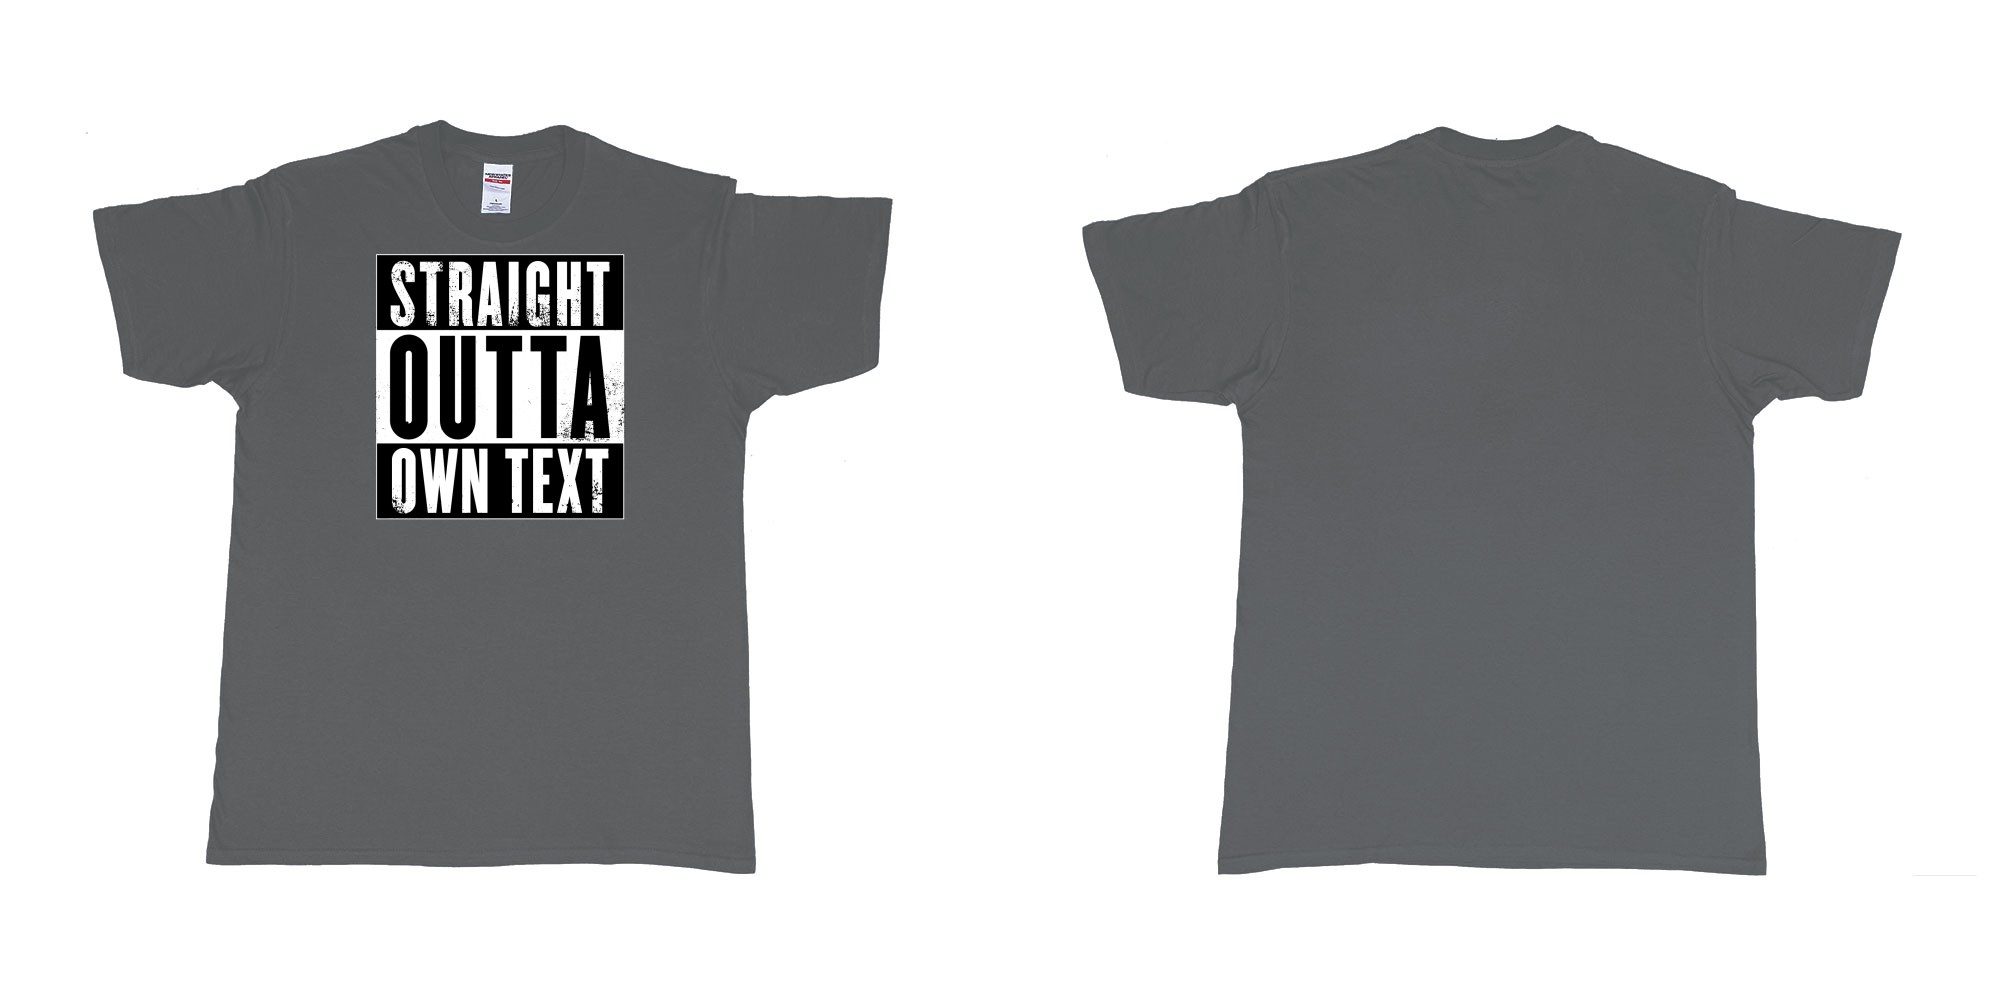 Custom tshirt design Straight Outta Compton in fabric color charcoal choice your own text made in Bali by The Pirate Way